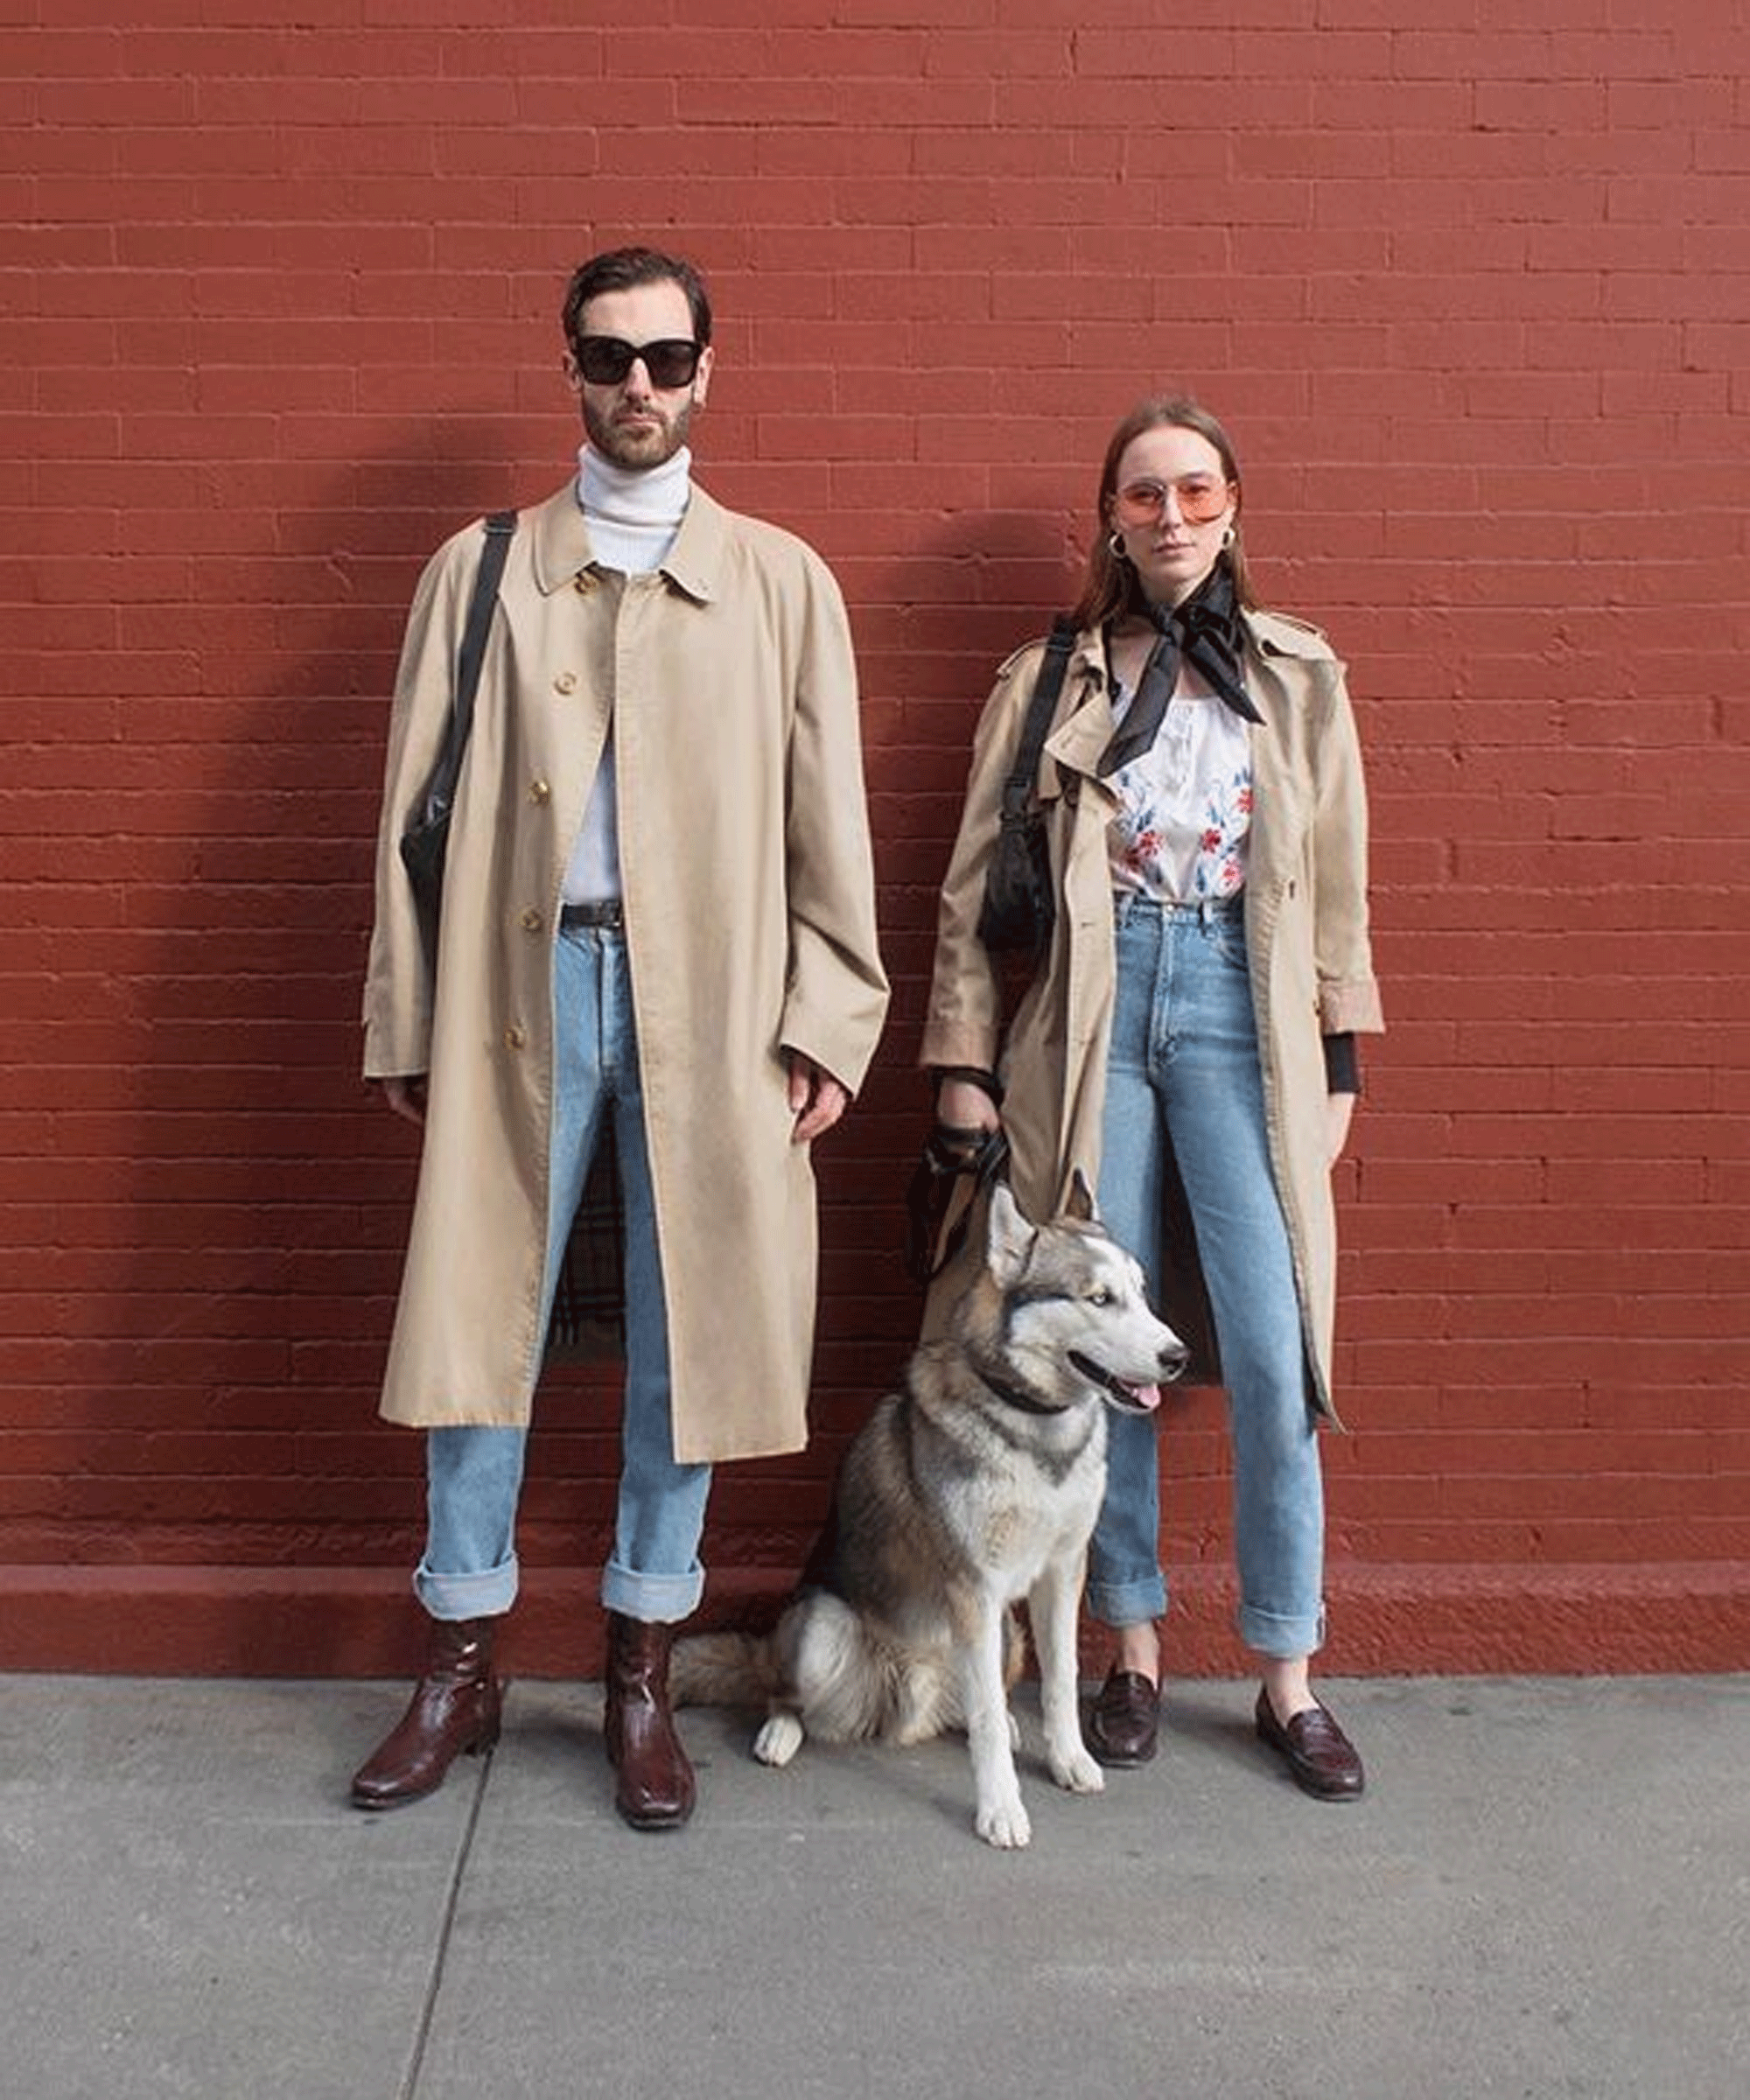 Would You Match Outfits With Your Significant Other?